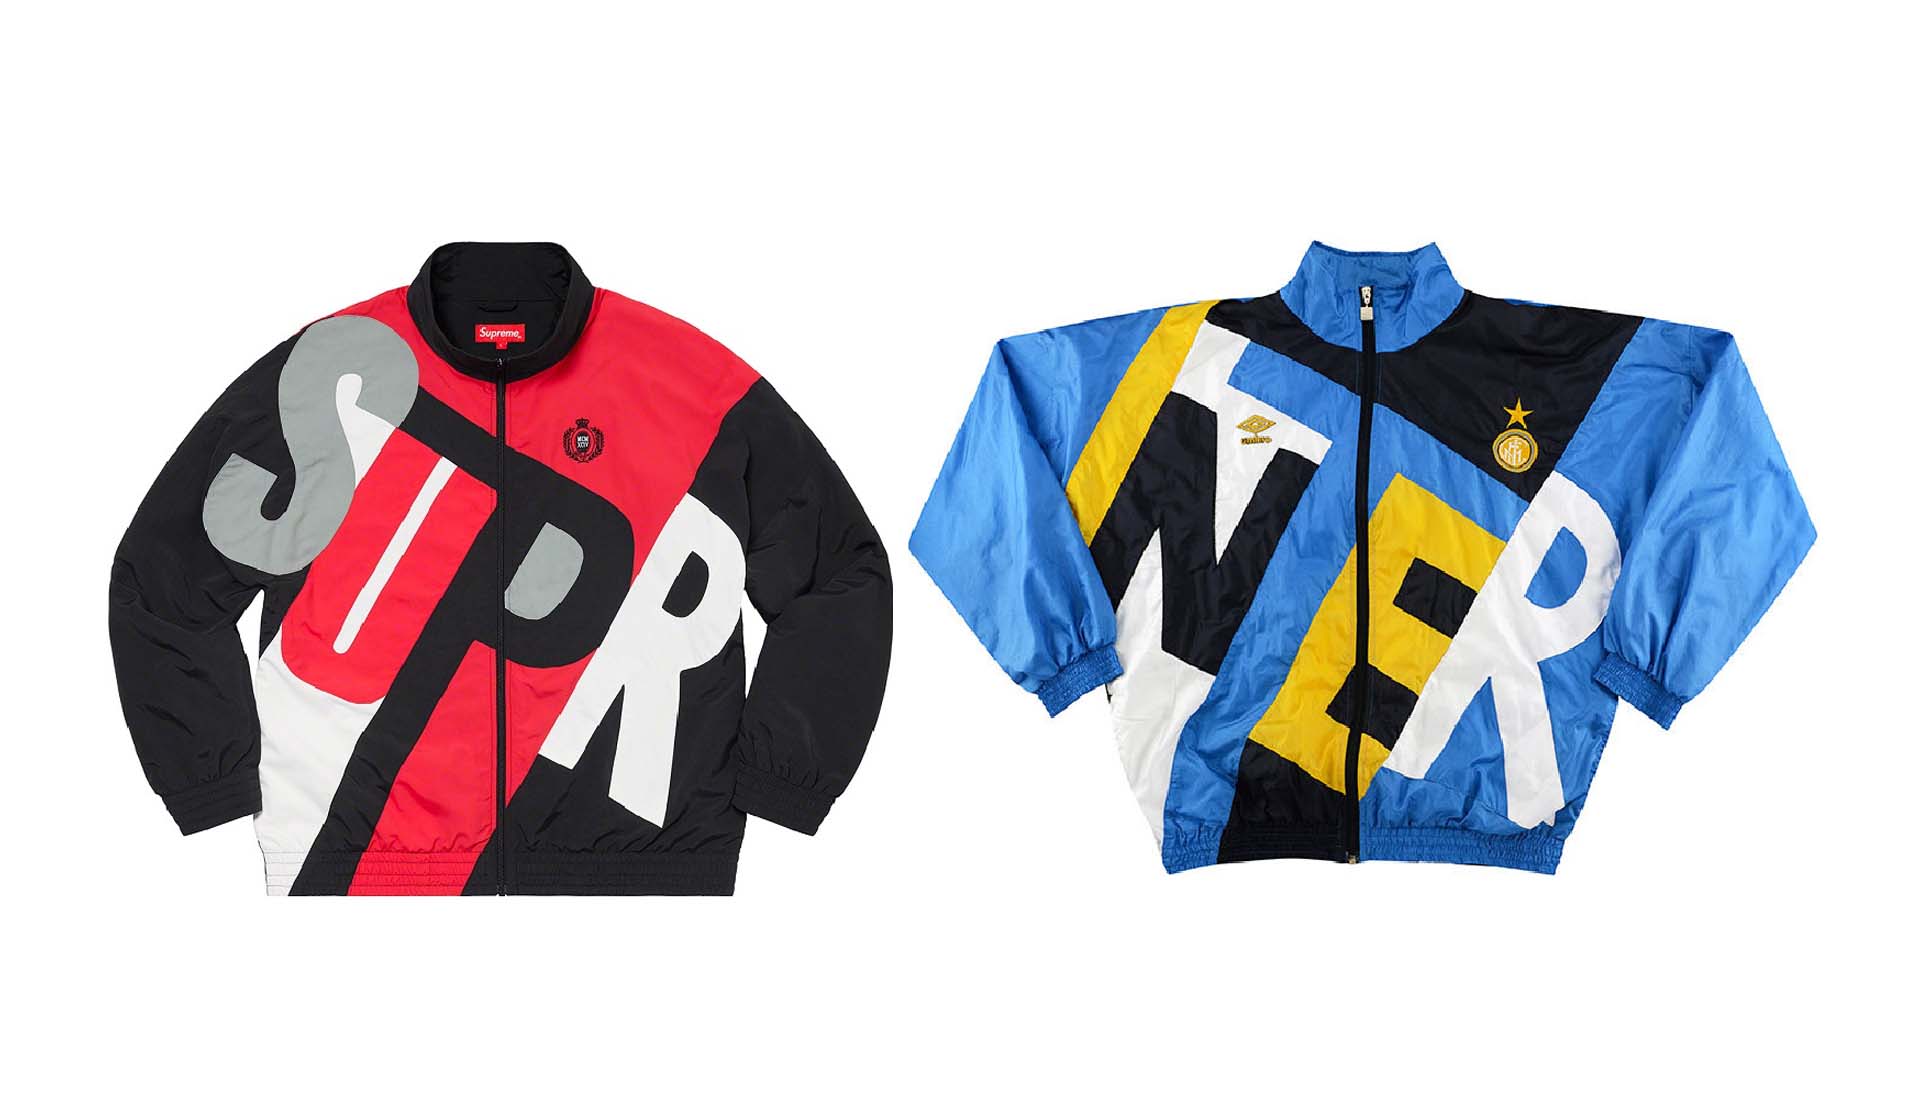 Supreme Produce Jacket In Homage To 90s Inter Design - SoccerBible